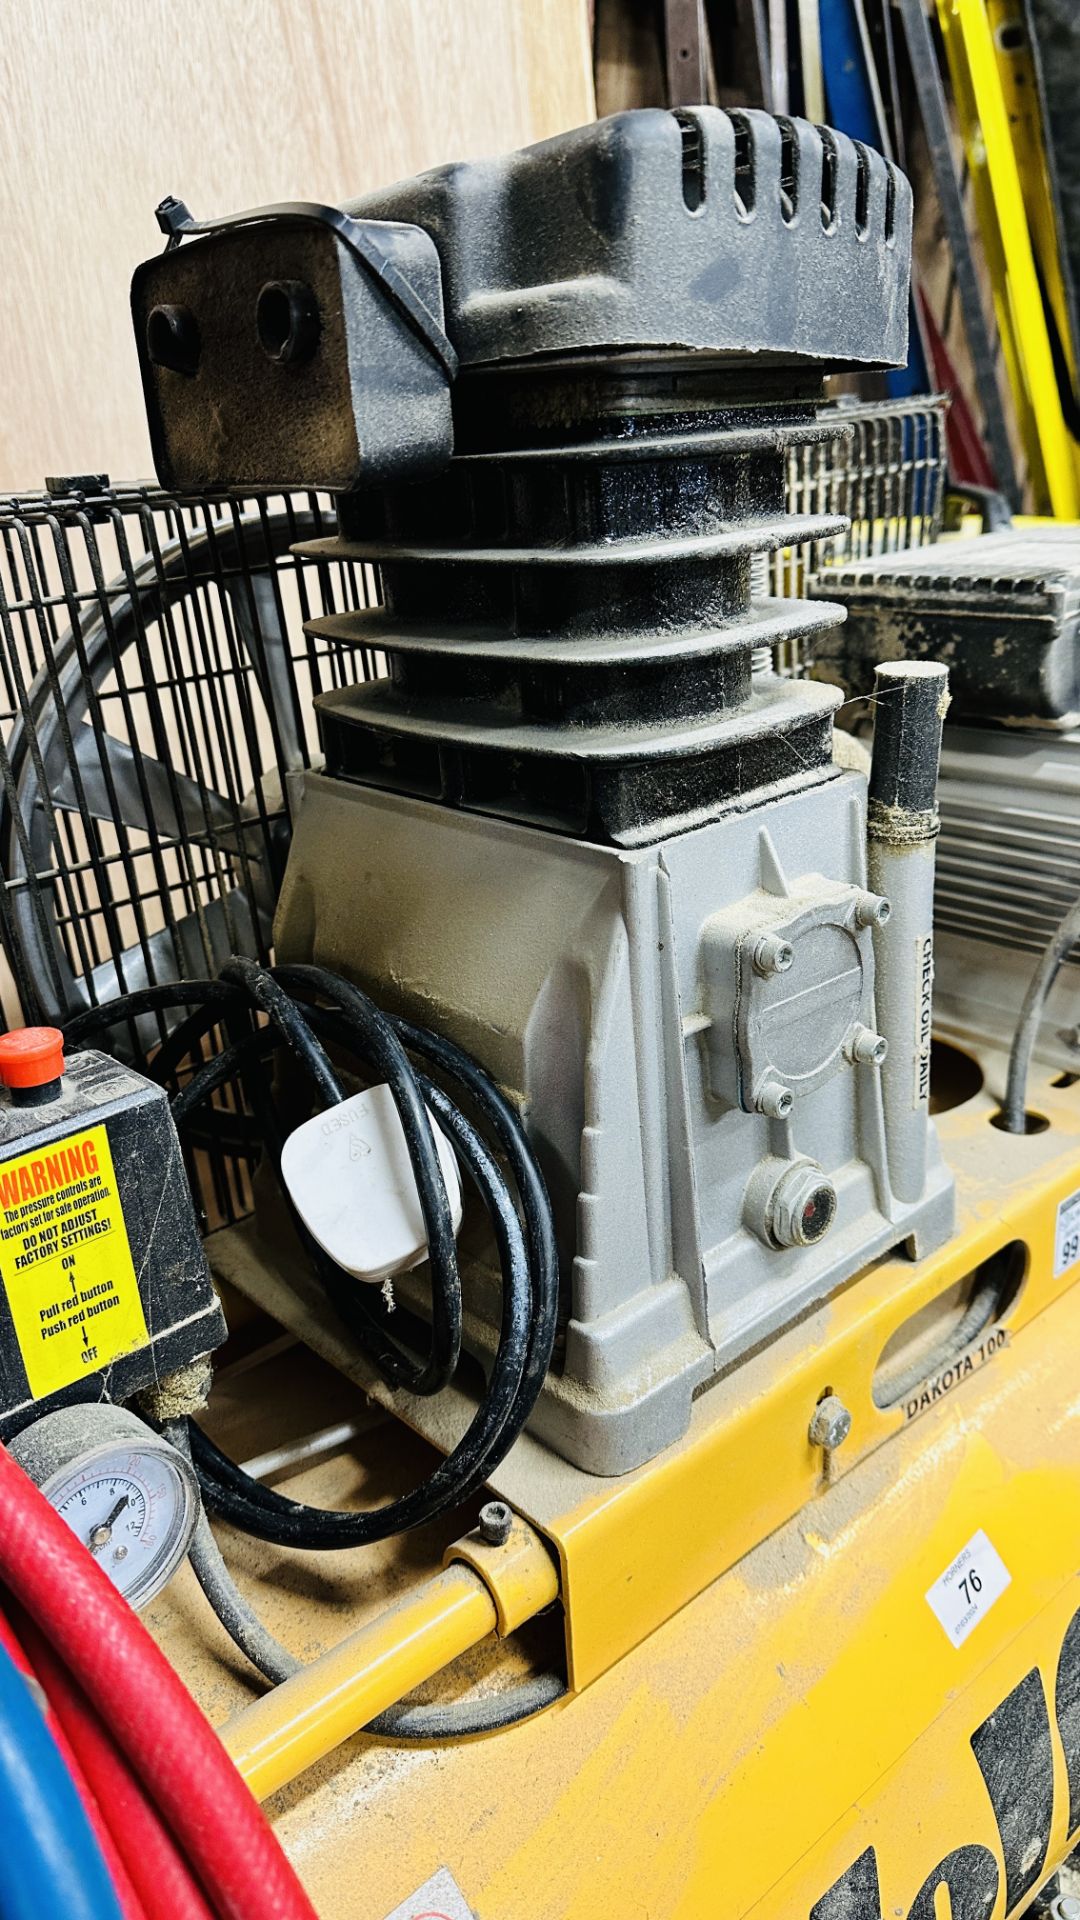 WOLF AIR DAKOTA 100 COMMERCIAL AIR COMPRESSOR, 90 LITRE TANK ALONG WITH VARIOUS HOSES. - Image 8 of 8